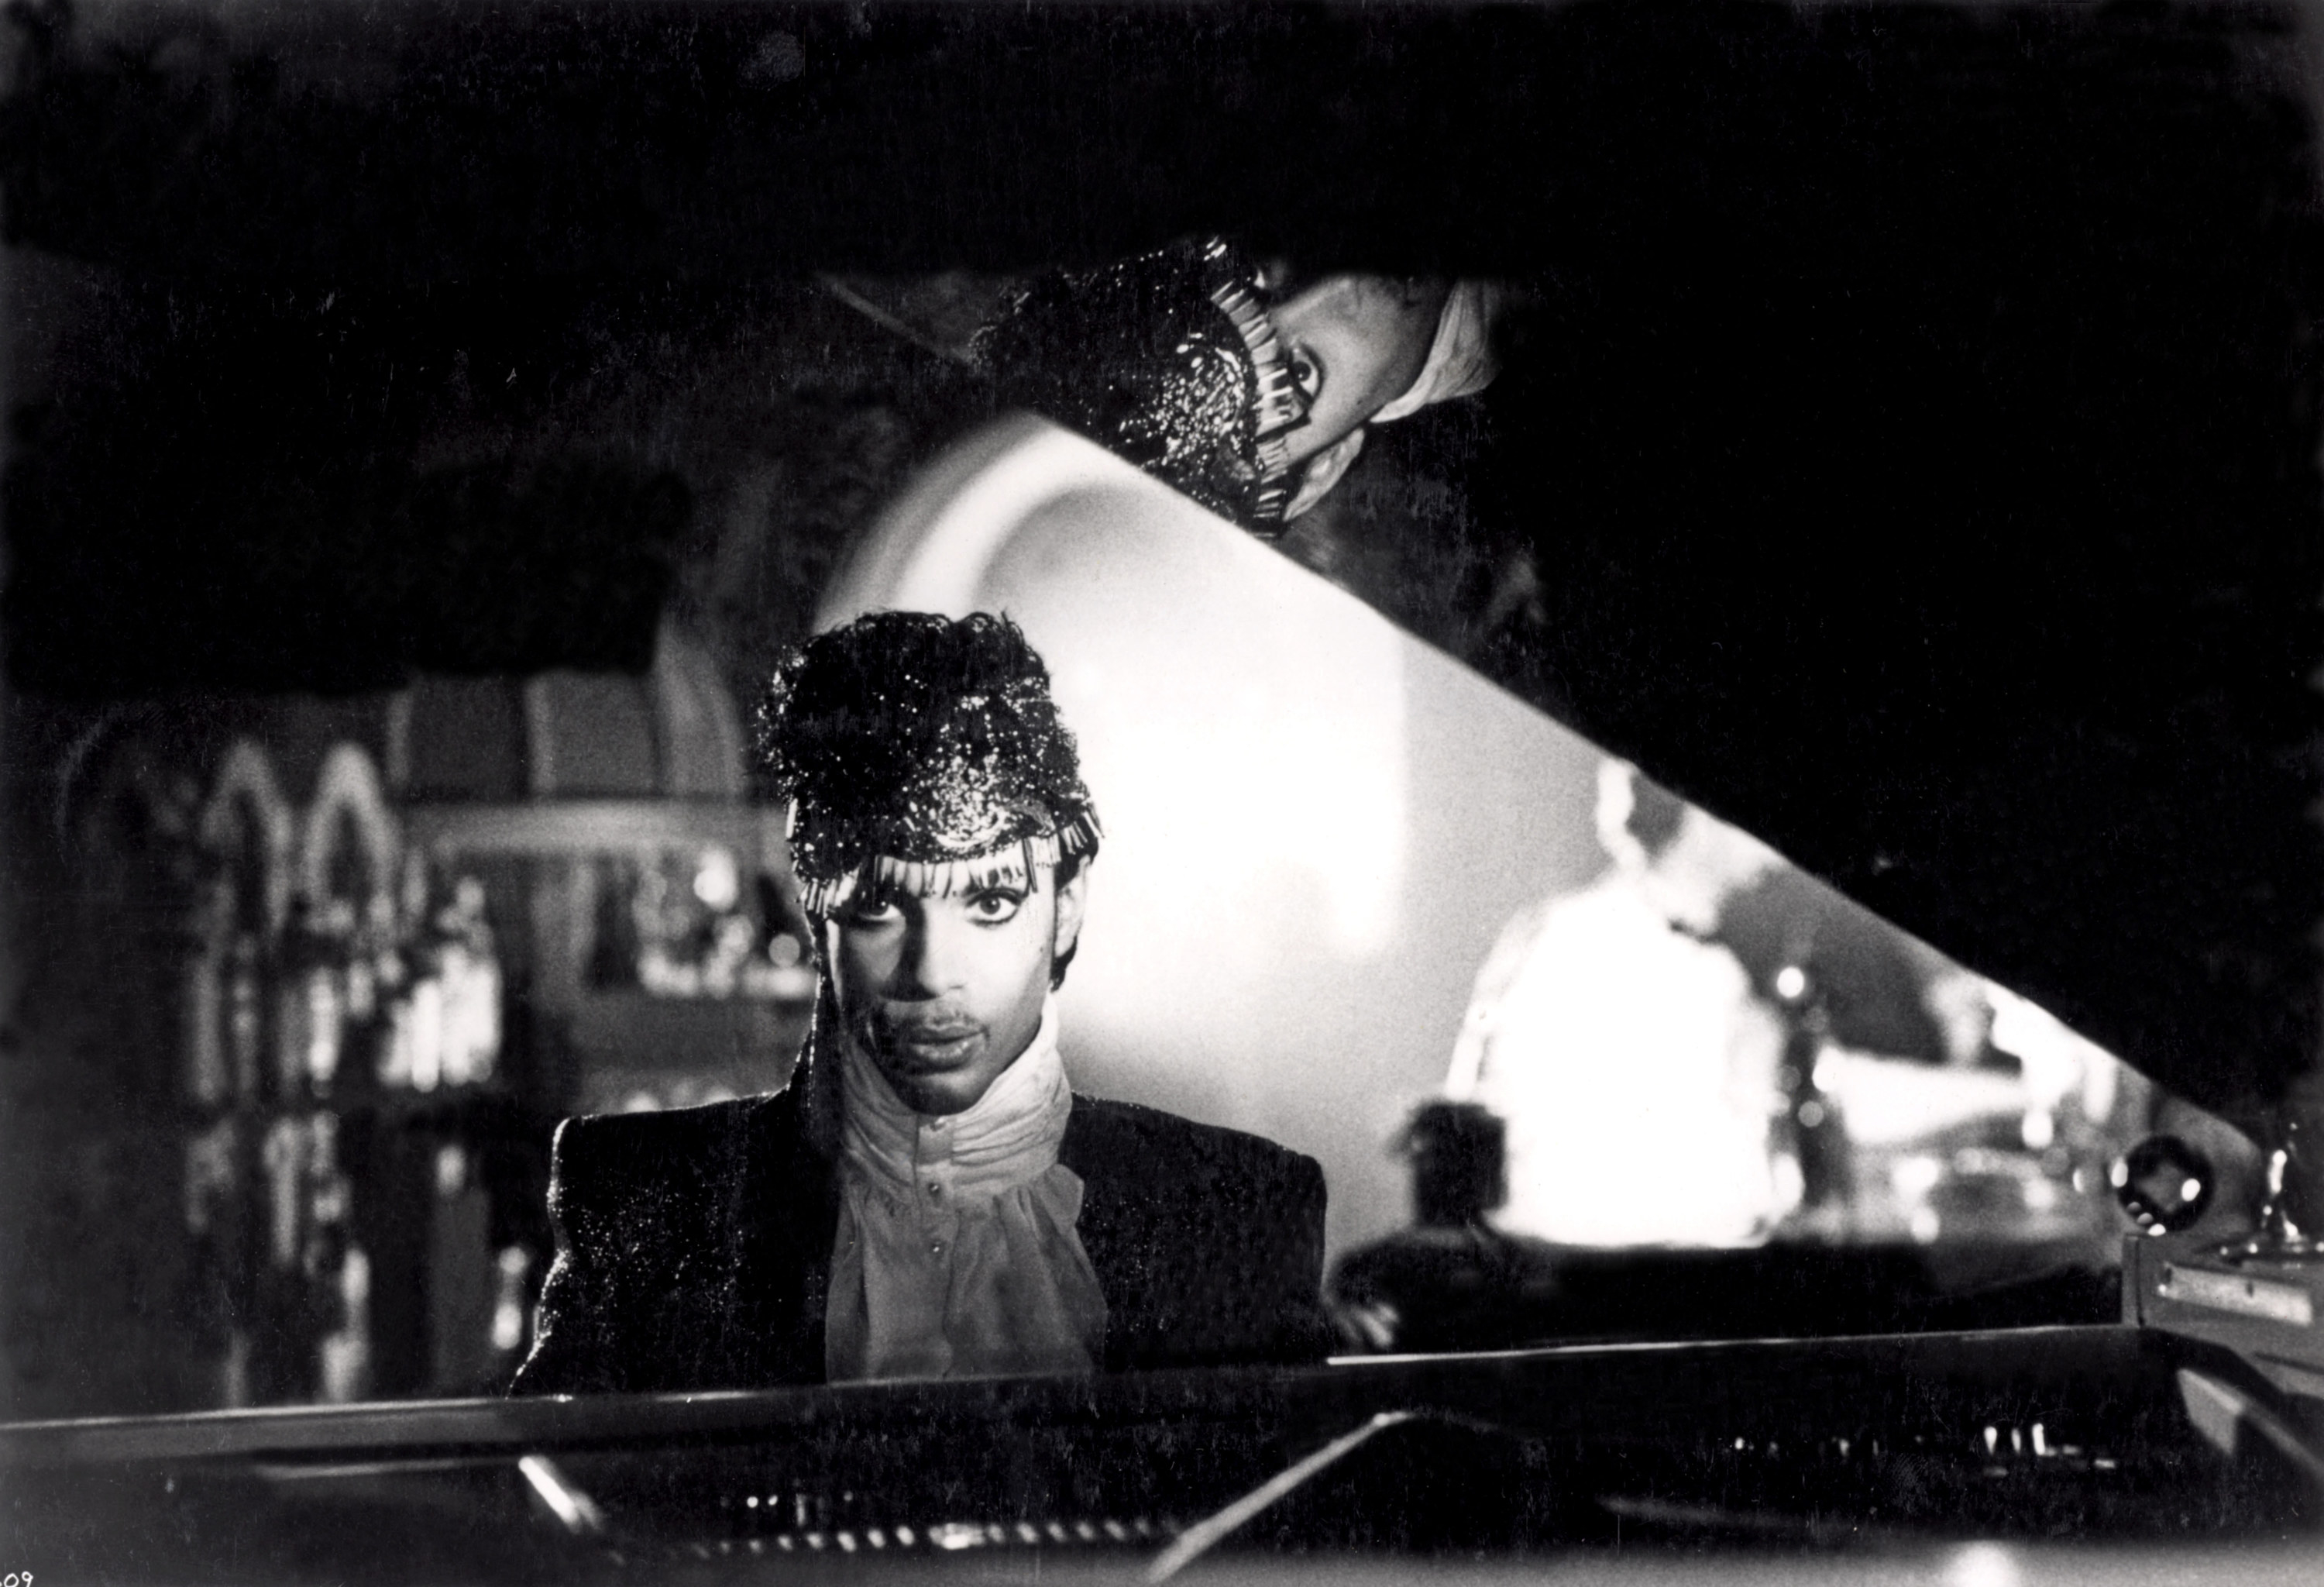 Prince sits behind a piano in black-and-white